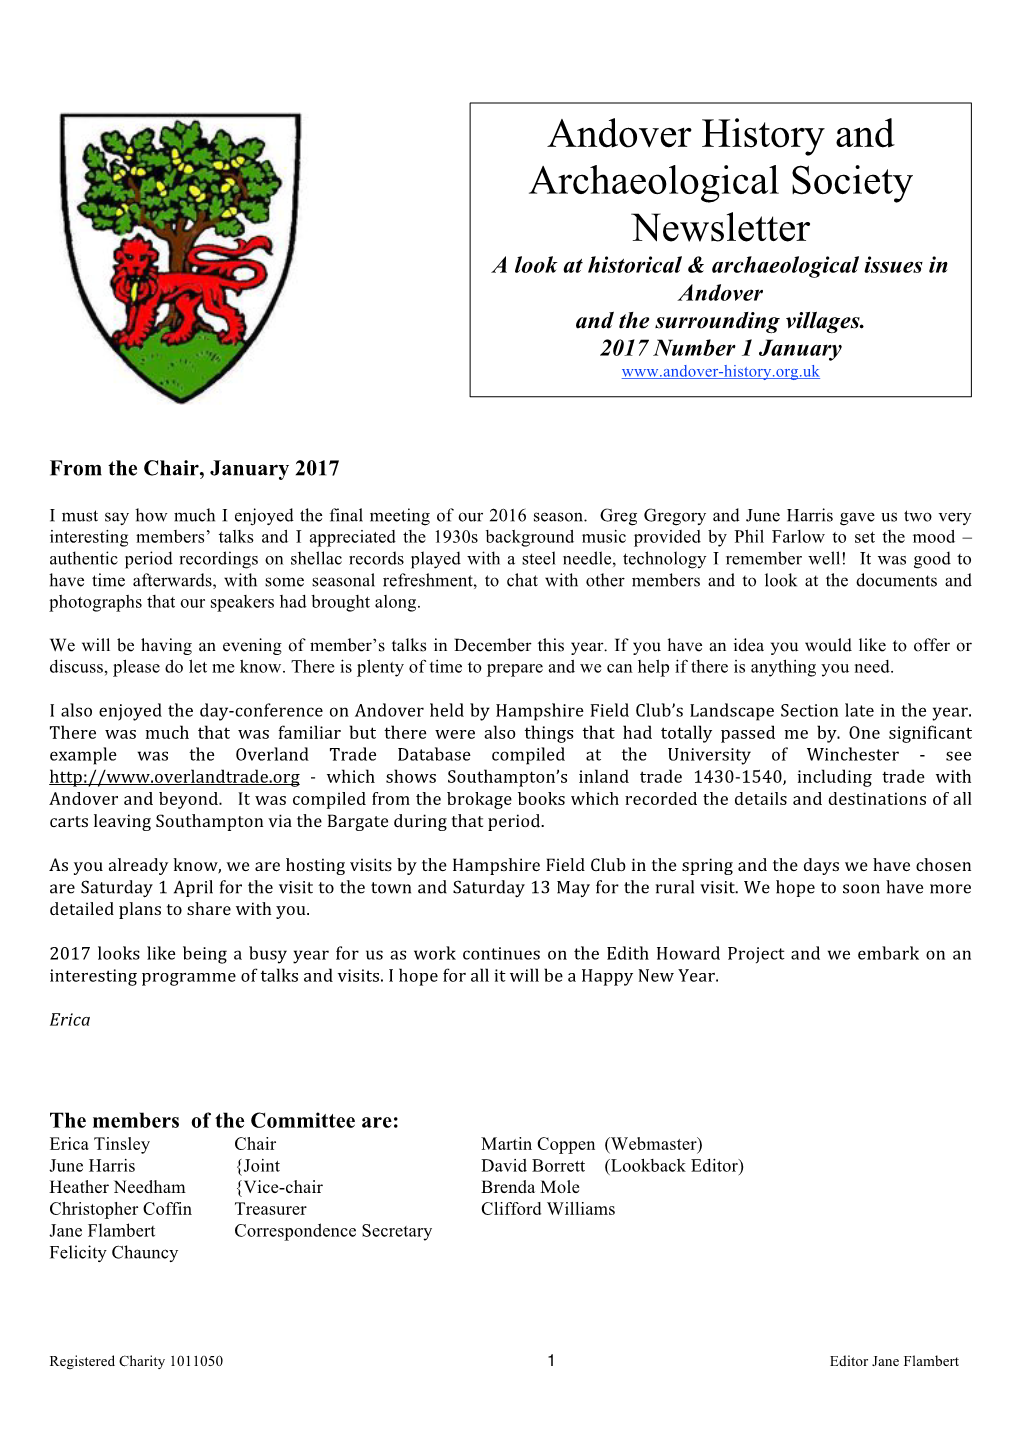 Andover History and Archaeological Society Newsletter a Look at Historical & Archaeological Issues in Andover and the Surrounding Villages